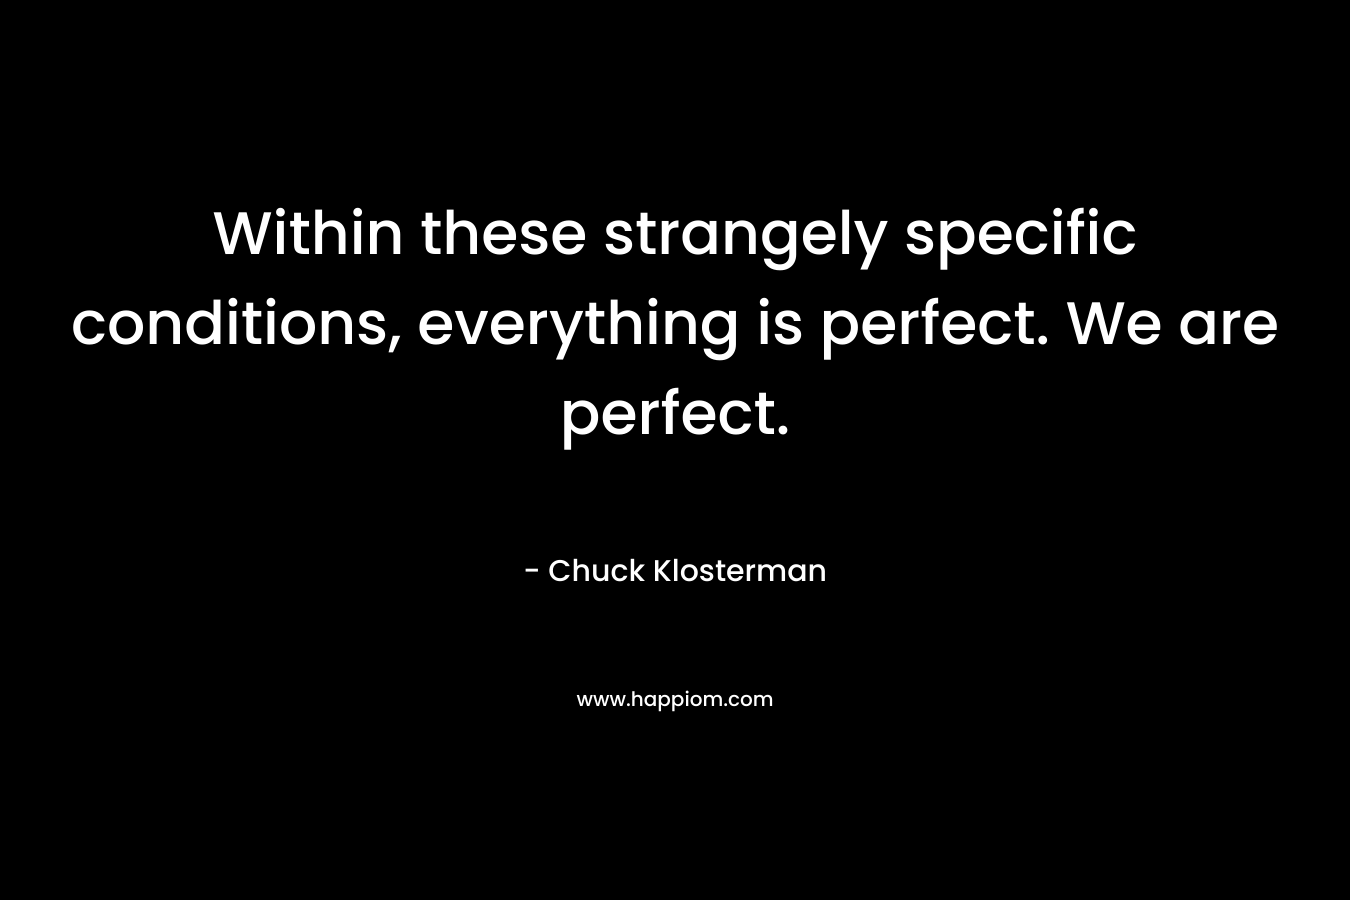 Within these strangely specific conditions, everything is perfect. We are perfect. – Chuck Klosterman